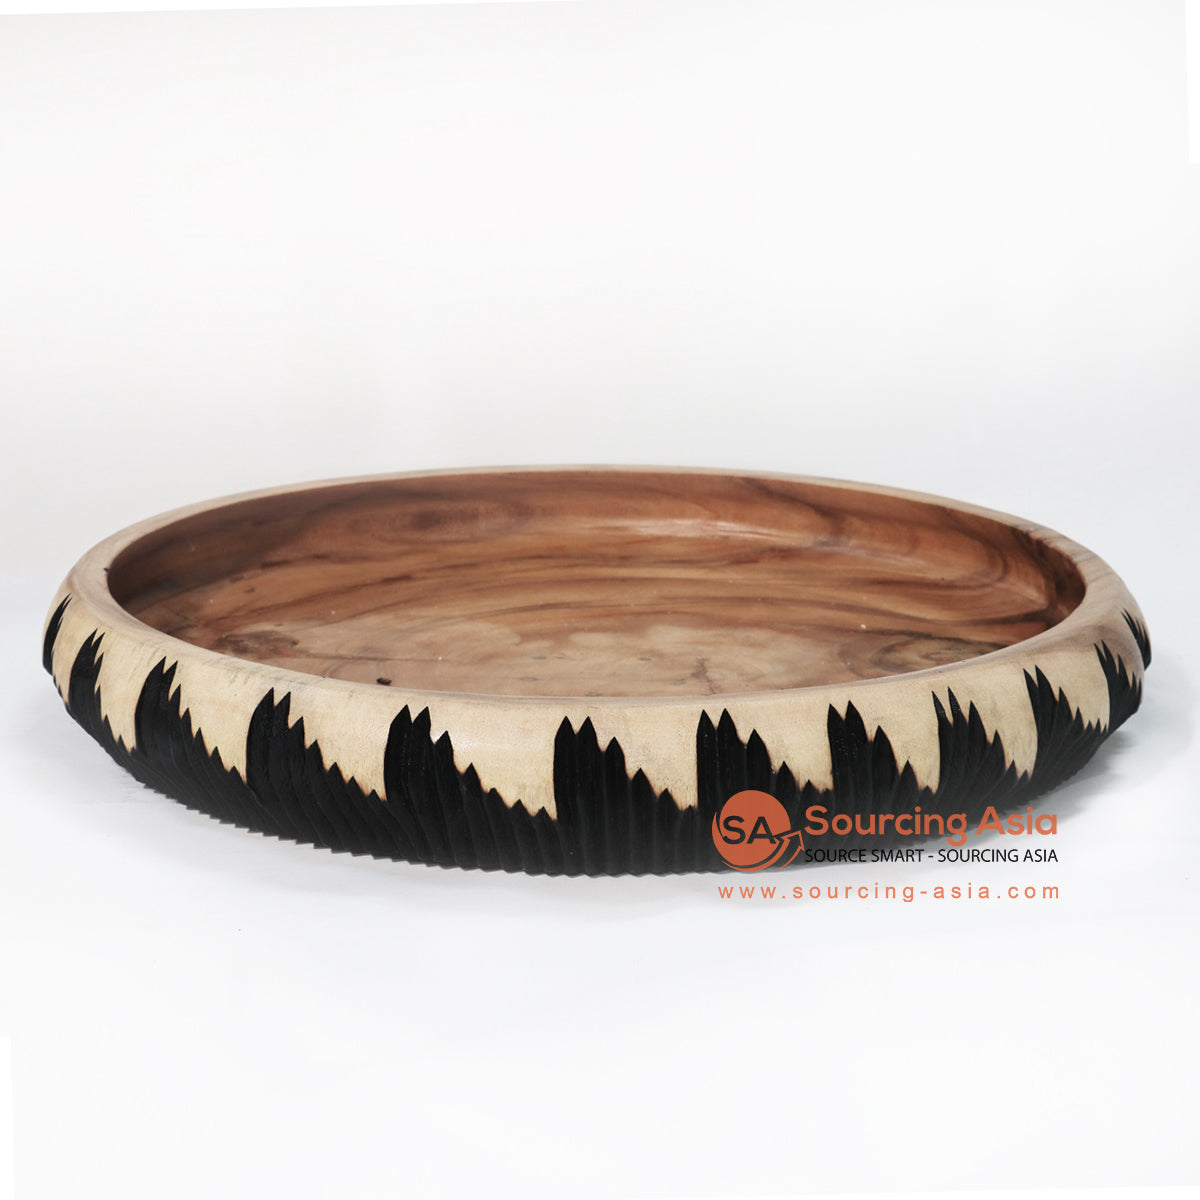 BMWC018 BLACK AND WHITE SUAR WOOD TRIBAL CARVED SERVING PLATE